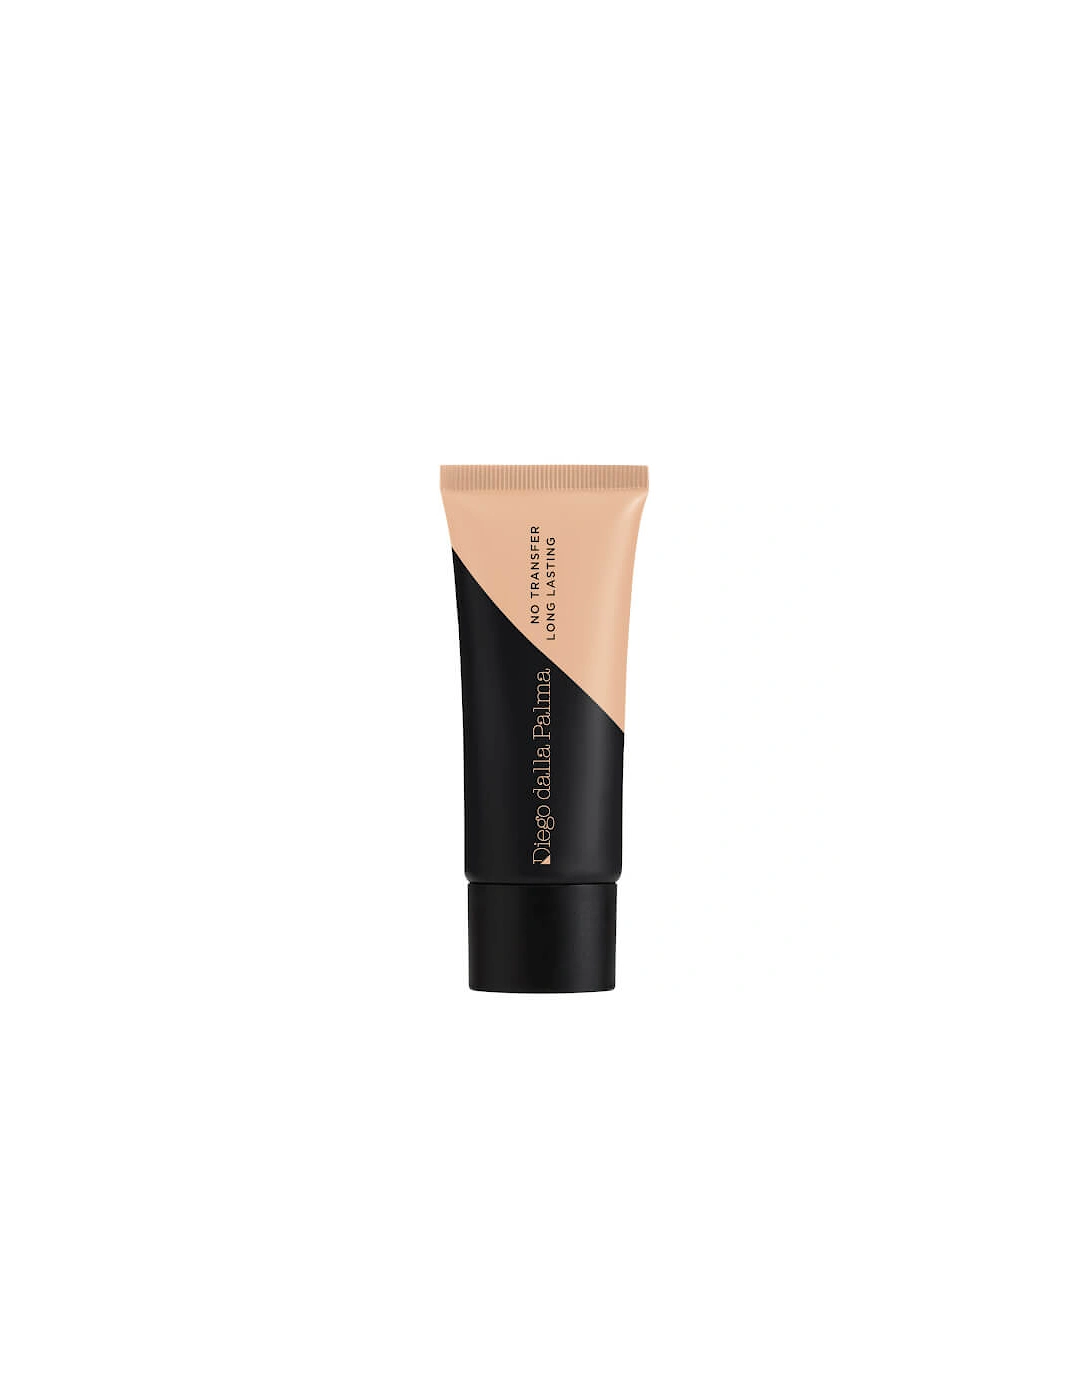 Stay on Me No Transfer Long Lasting Water Resistant Foundation - Terracotta Beige - Diego Dalla Palma, 2 of 1